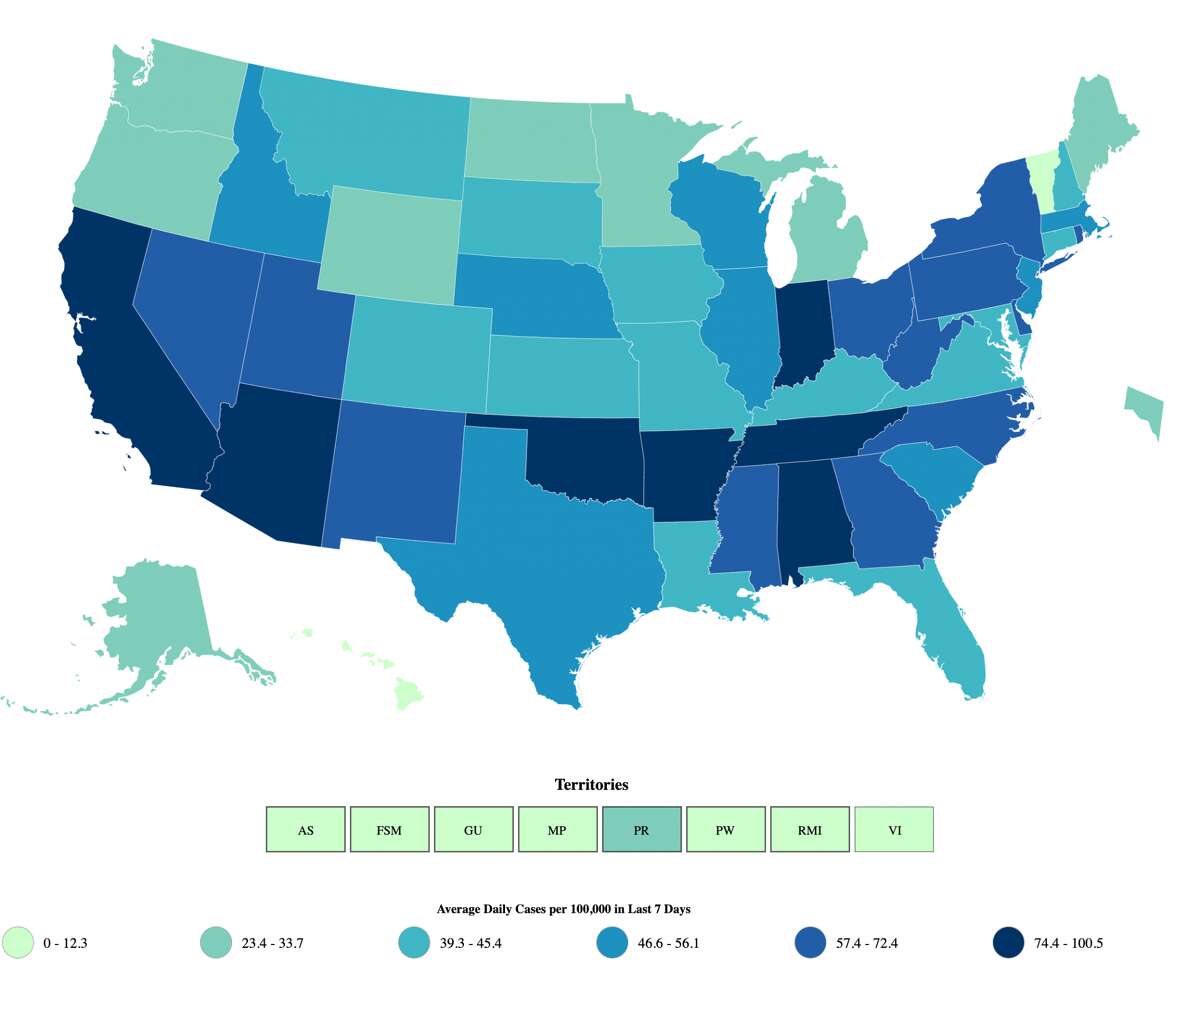 A map from the U.S. Centers for Disease Control and Prevention shows the average daily cases per 100k in in the last seven days for all 50 states as of Dec. 26, 2020.